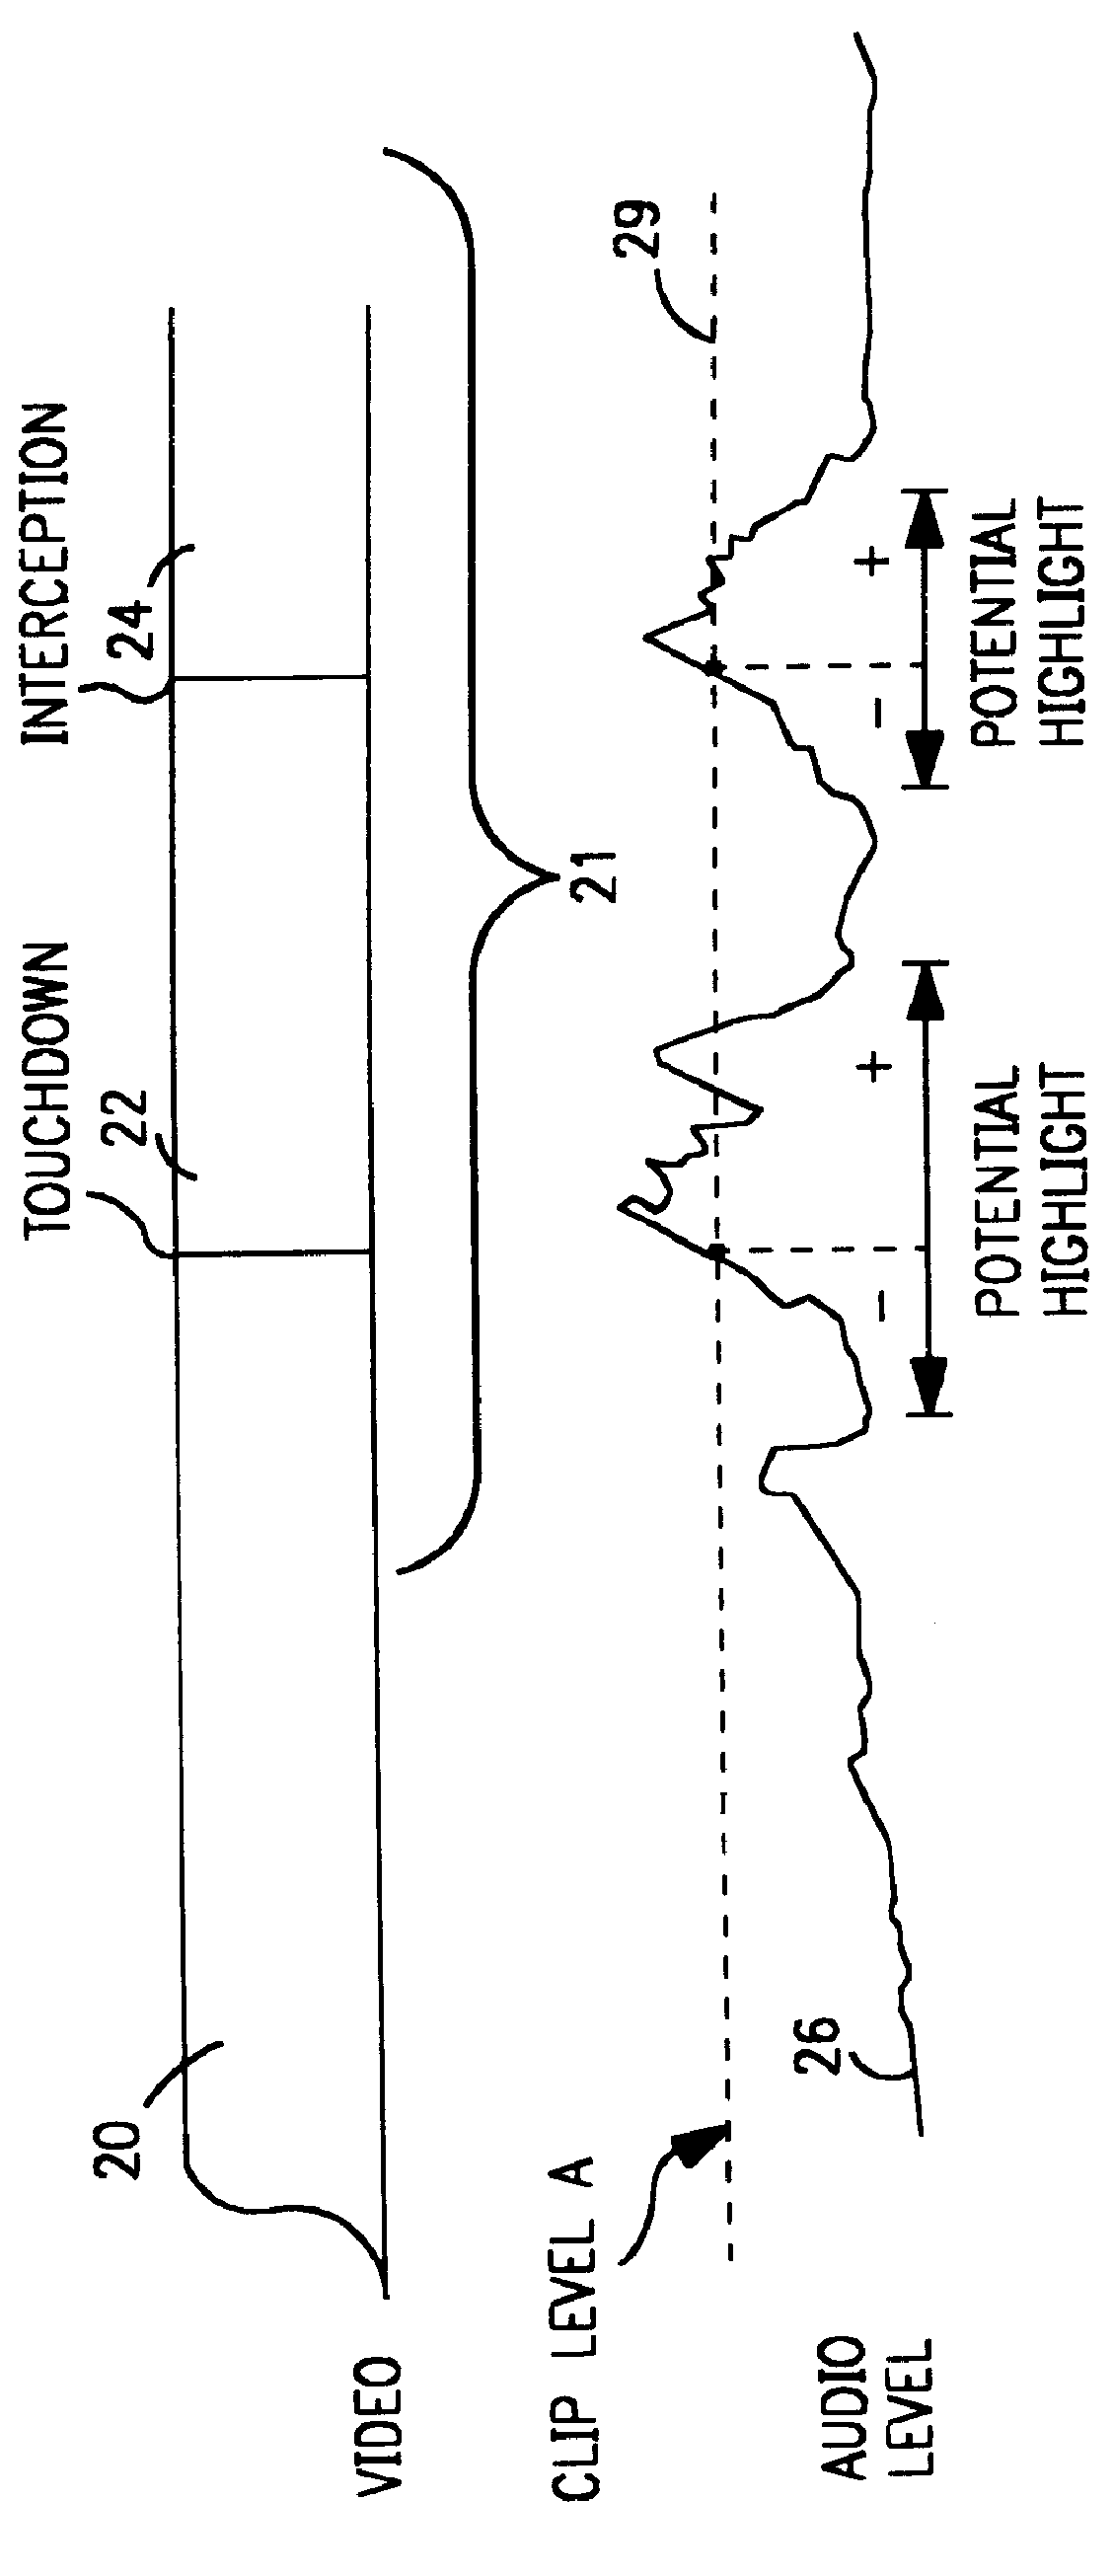 Multimedia search and indexing system and method of operation using audio cues with signal thresholds